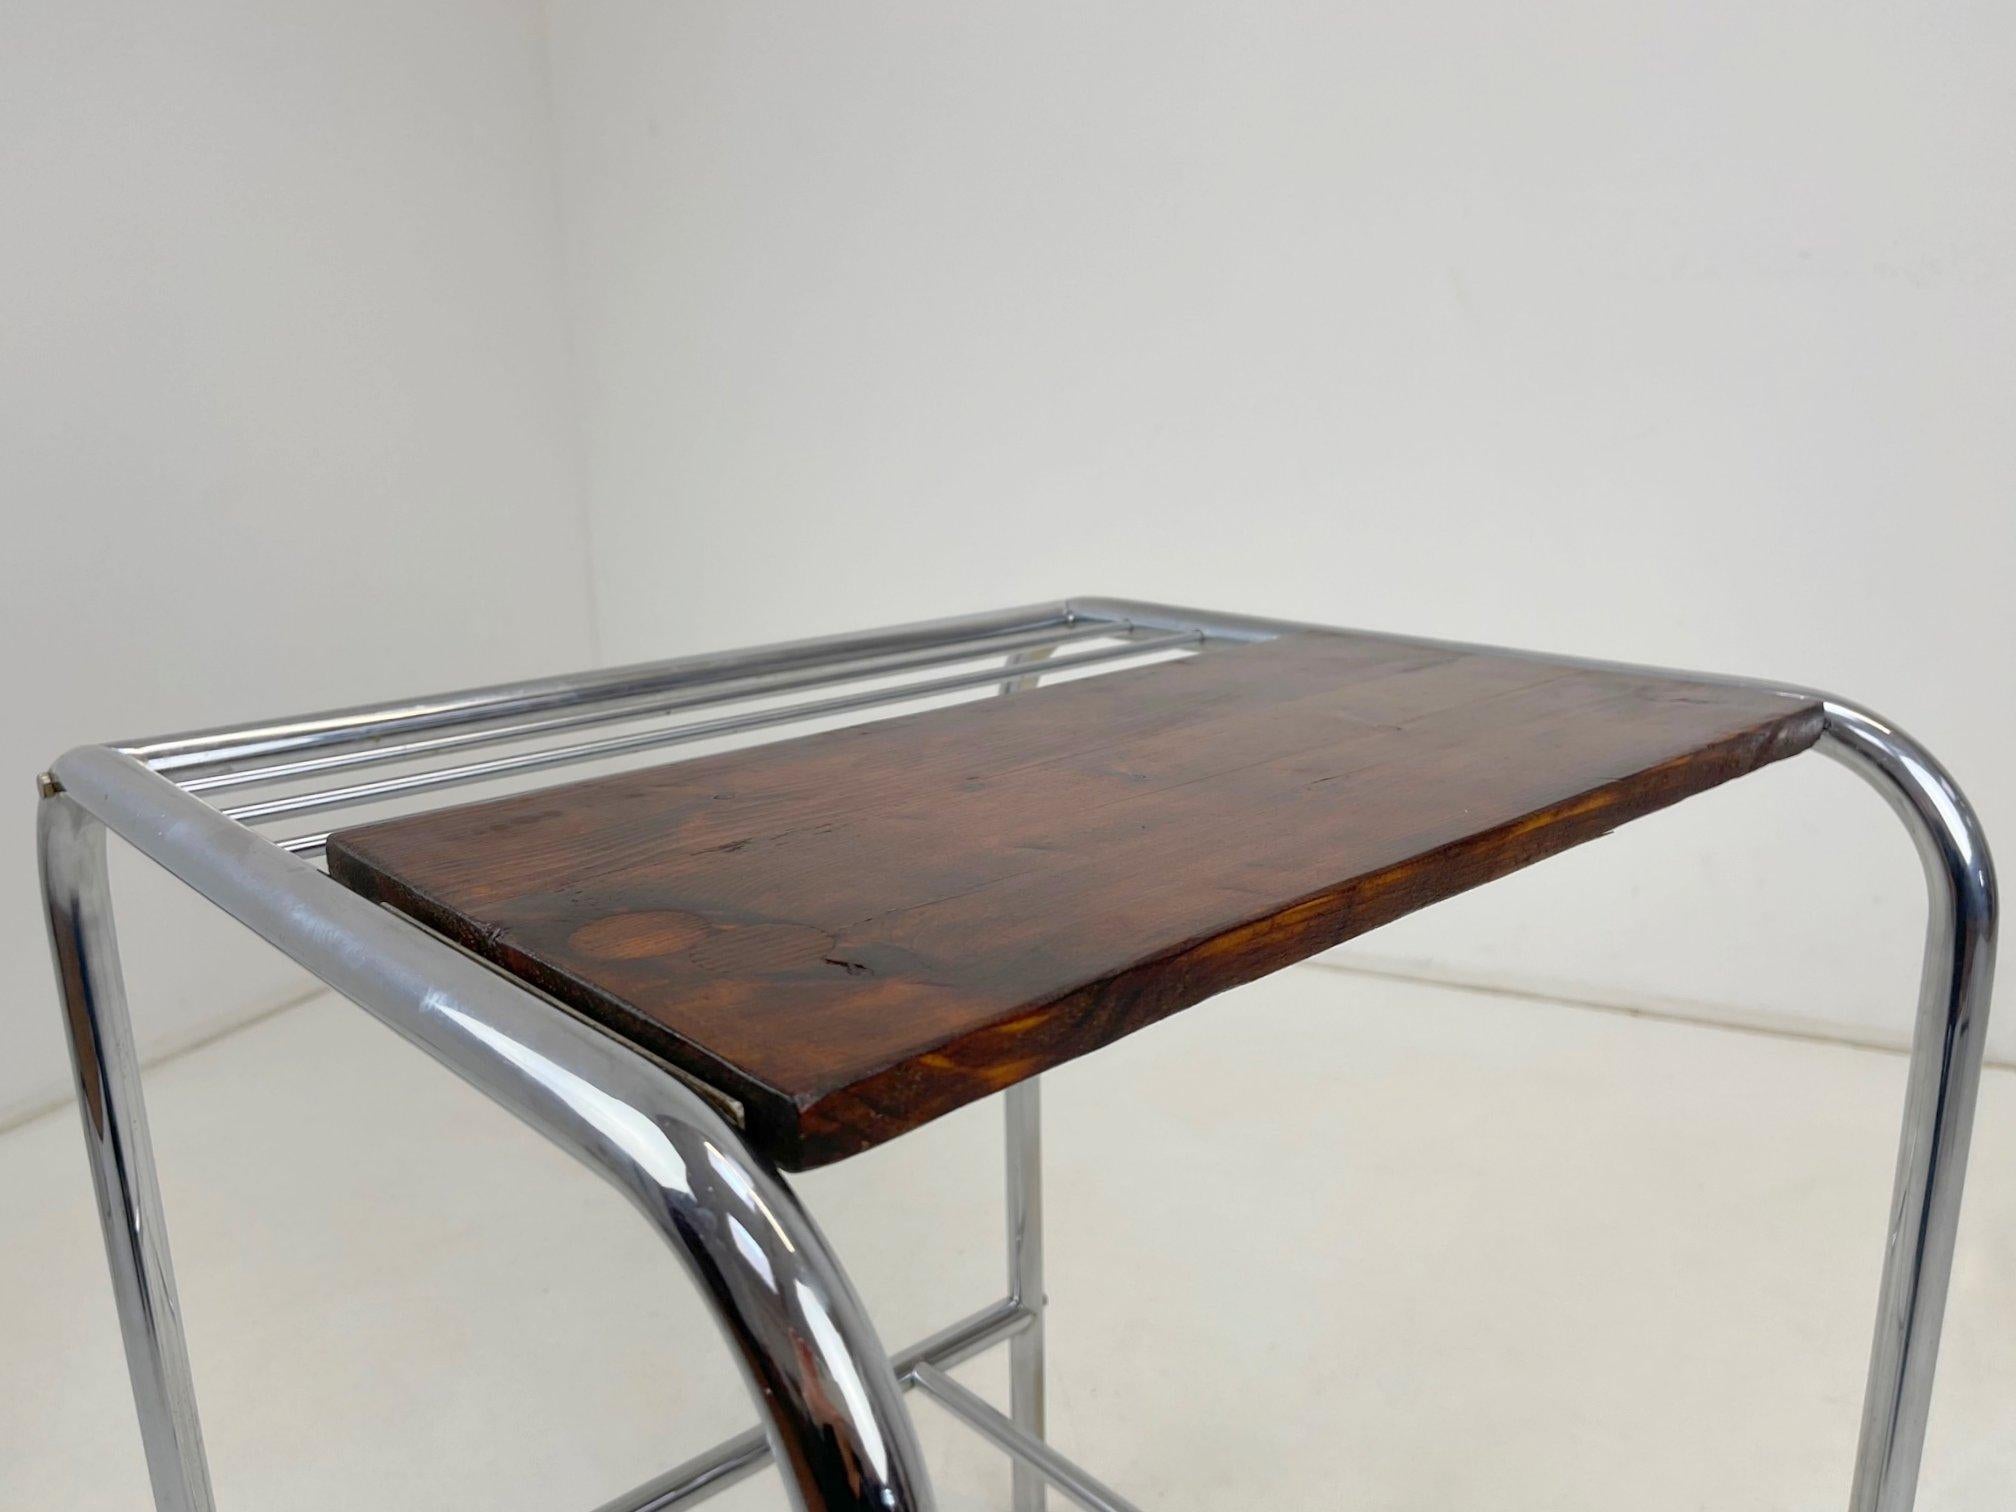 Functionalist Chrome & Wood Table, 1950's For Sale 1